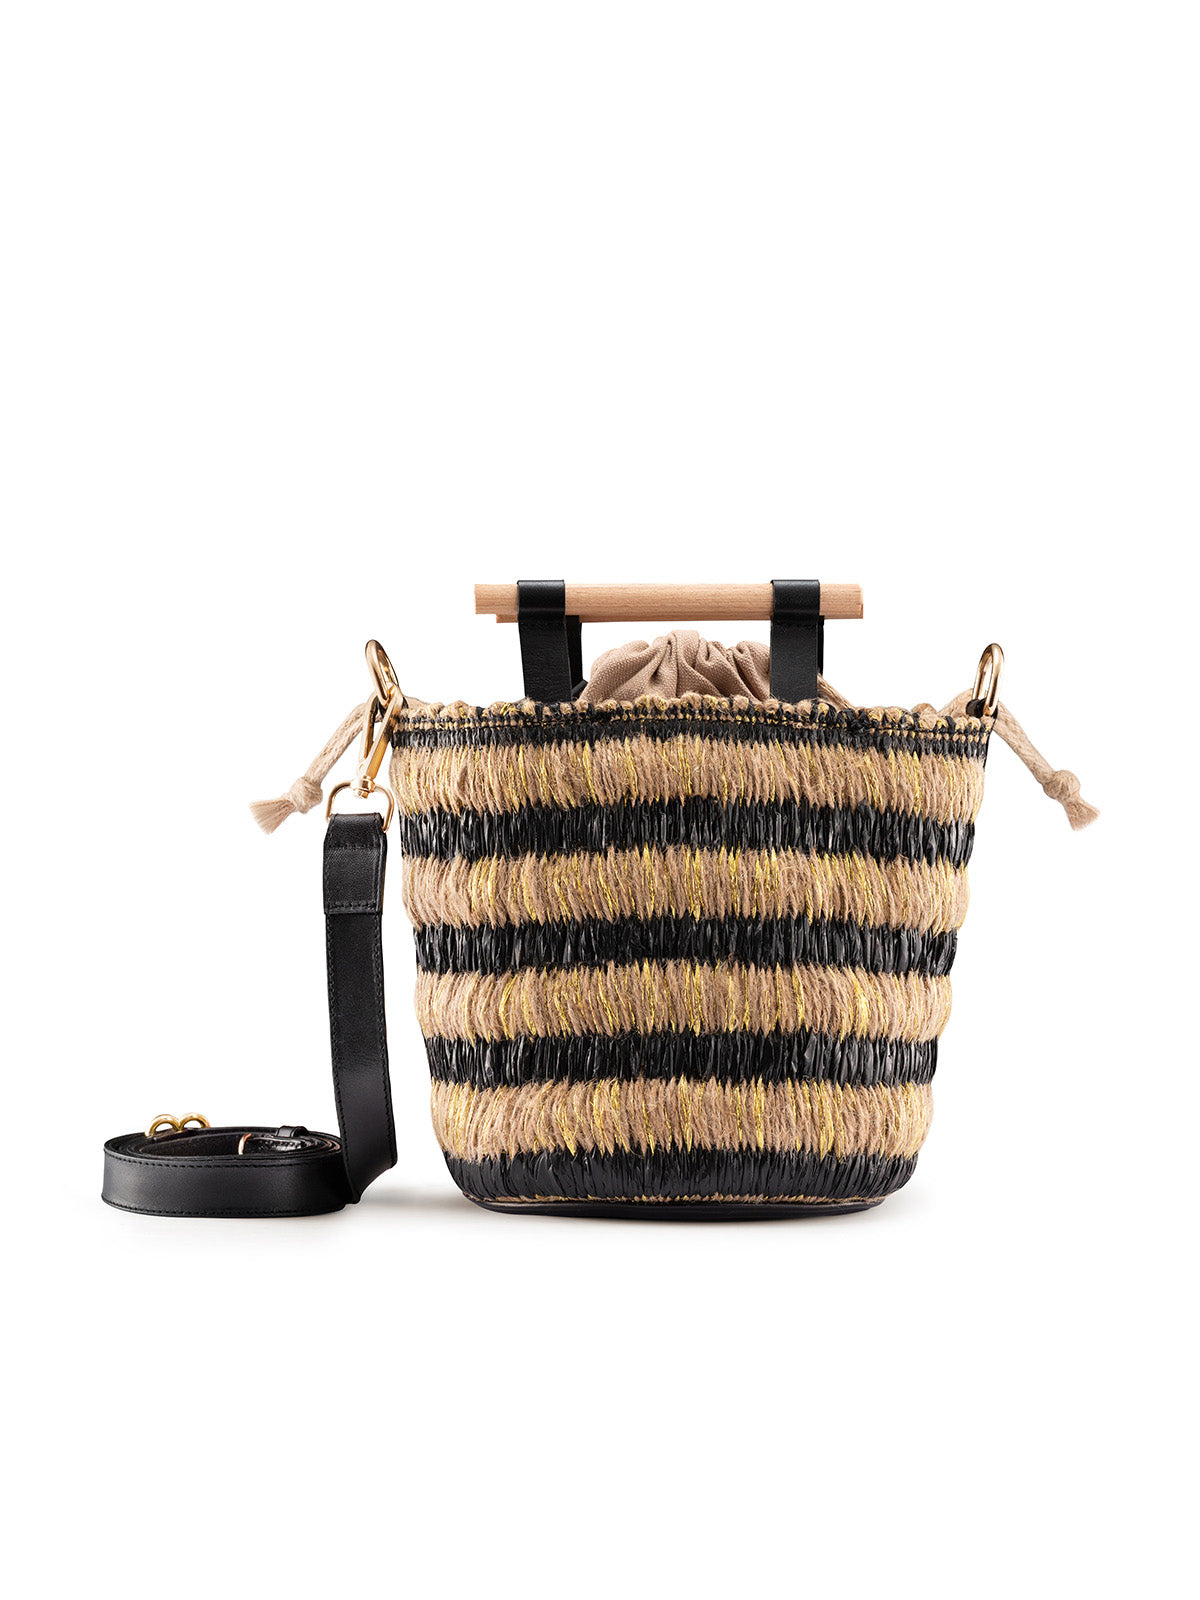 Mini Afro Basket in Black and Gold